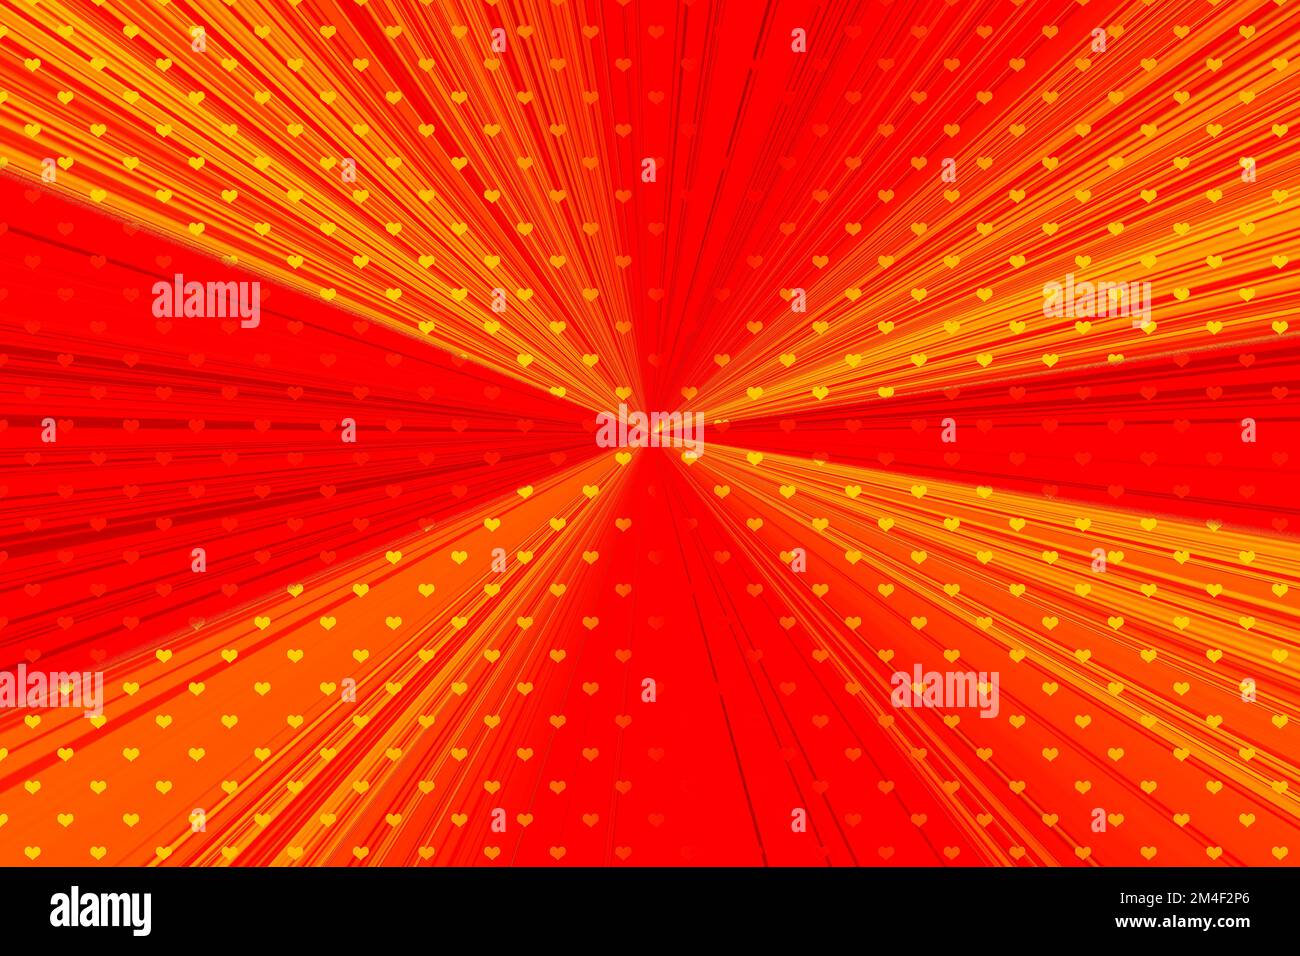 An illustration of a kaleidoscopic red background with seamless hearts on it - concept of Valentine Stock Photo